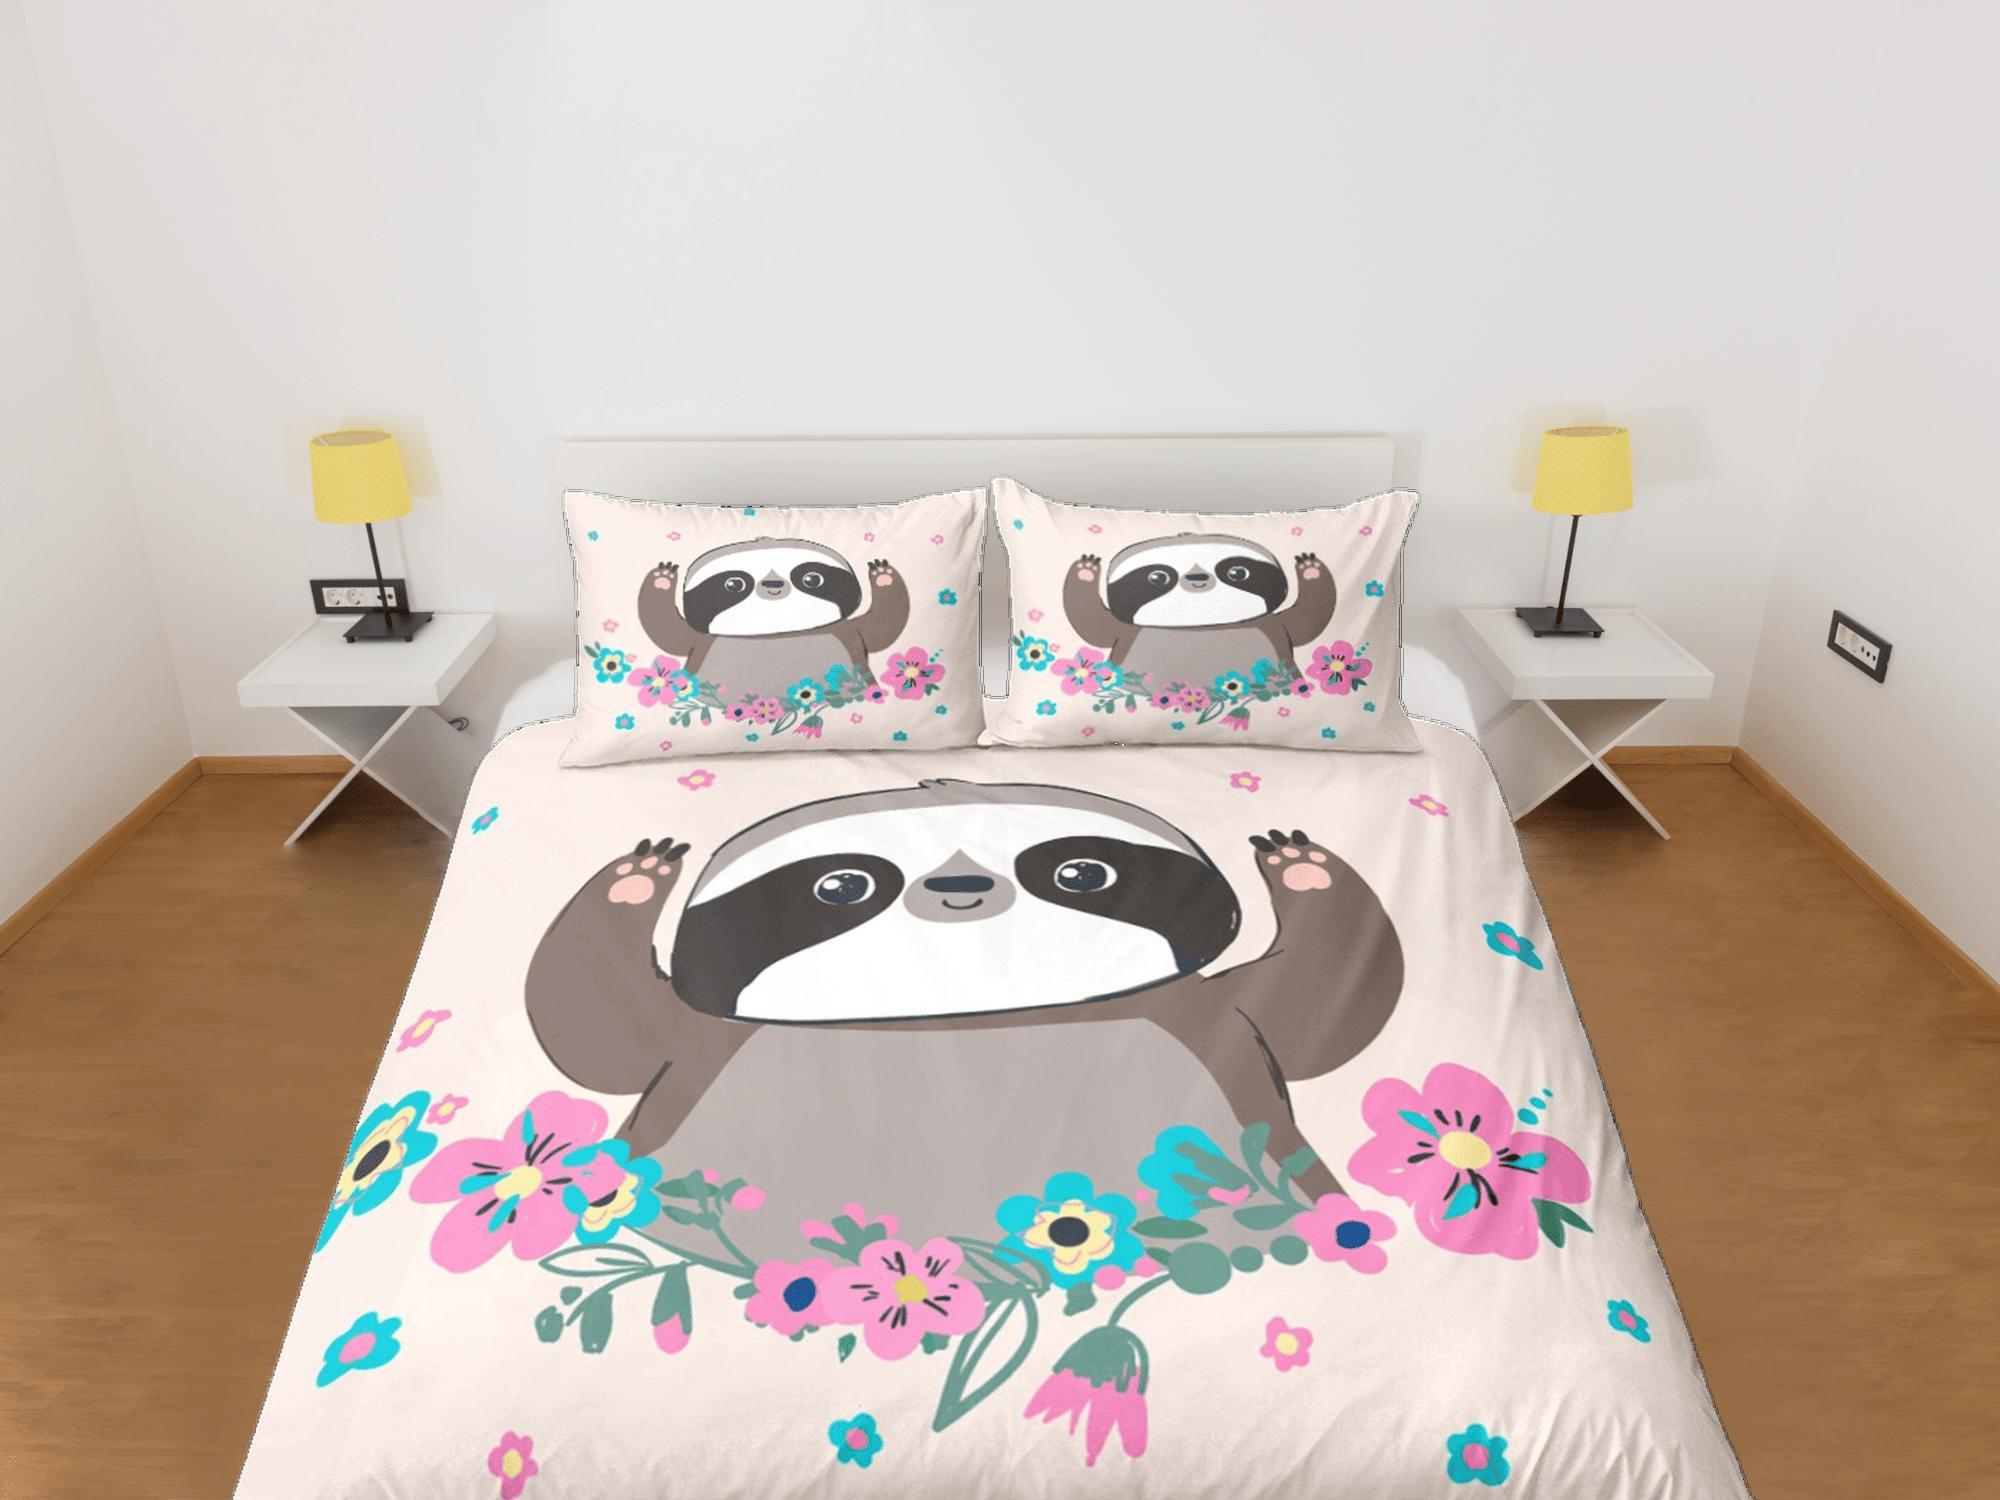 daintyduvet Cute Sloth Girly Duvet Cover Set Colorful Bedspread, Kids Full Bedding Set with Pillowcase, Comforter Cover Twin